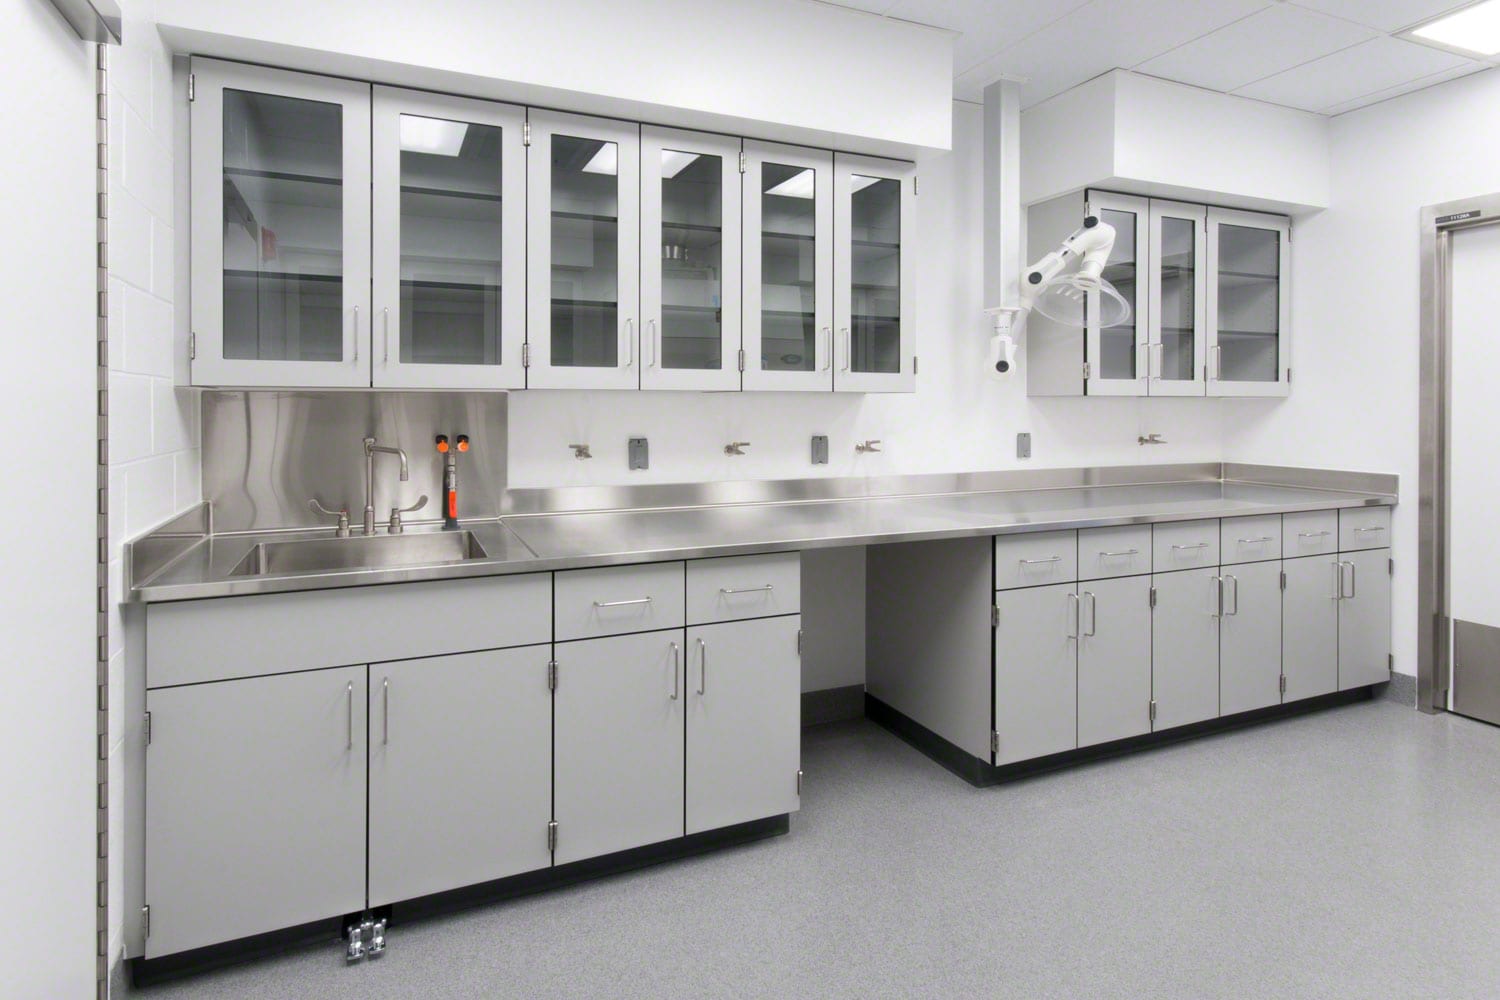 Phenolic Resin Cabinets New England Caseworks When it comes to resin countertops, the best answer is usually to apply more resin. phenolic resin cabinets new england